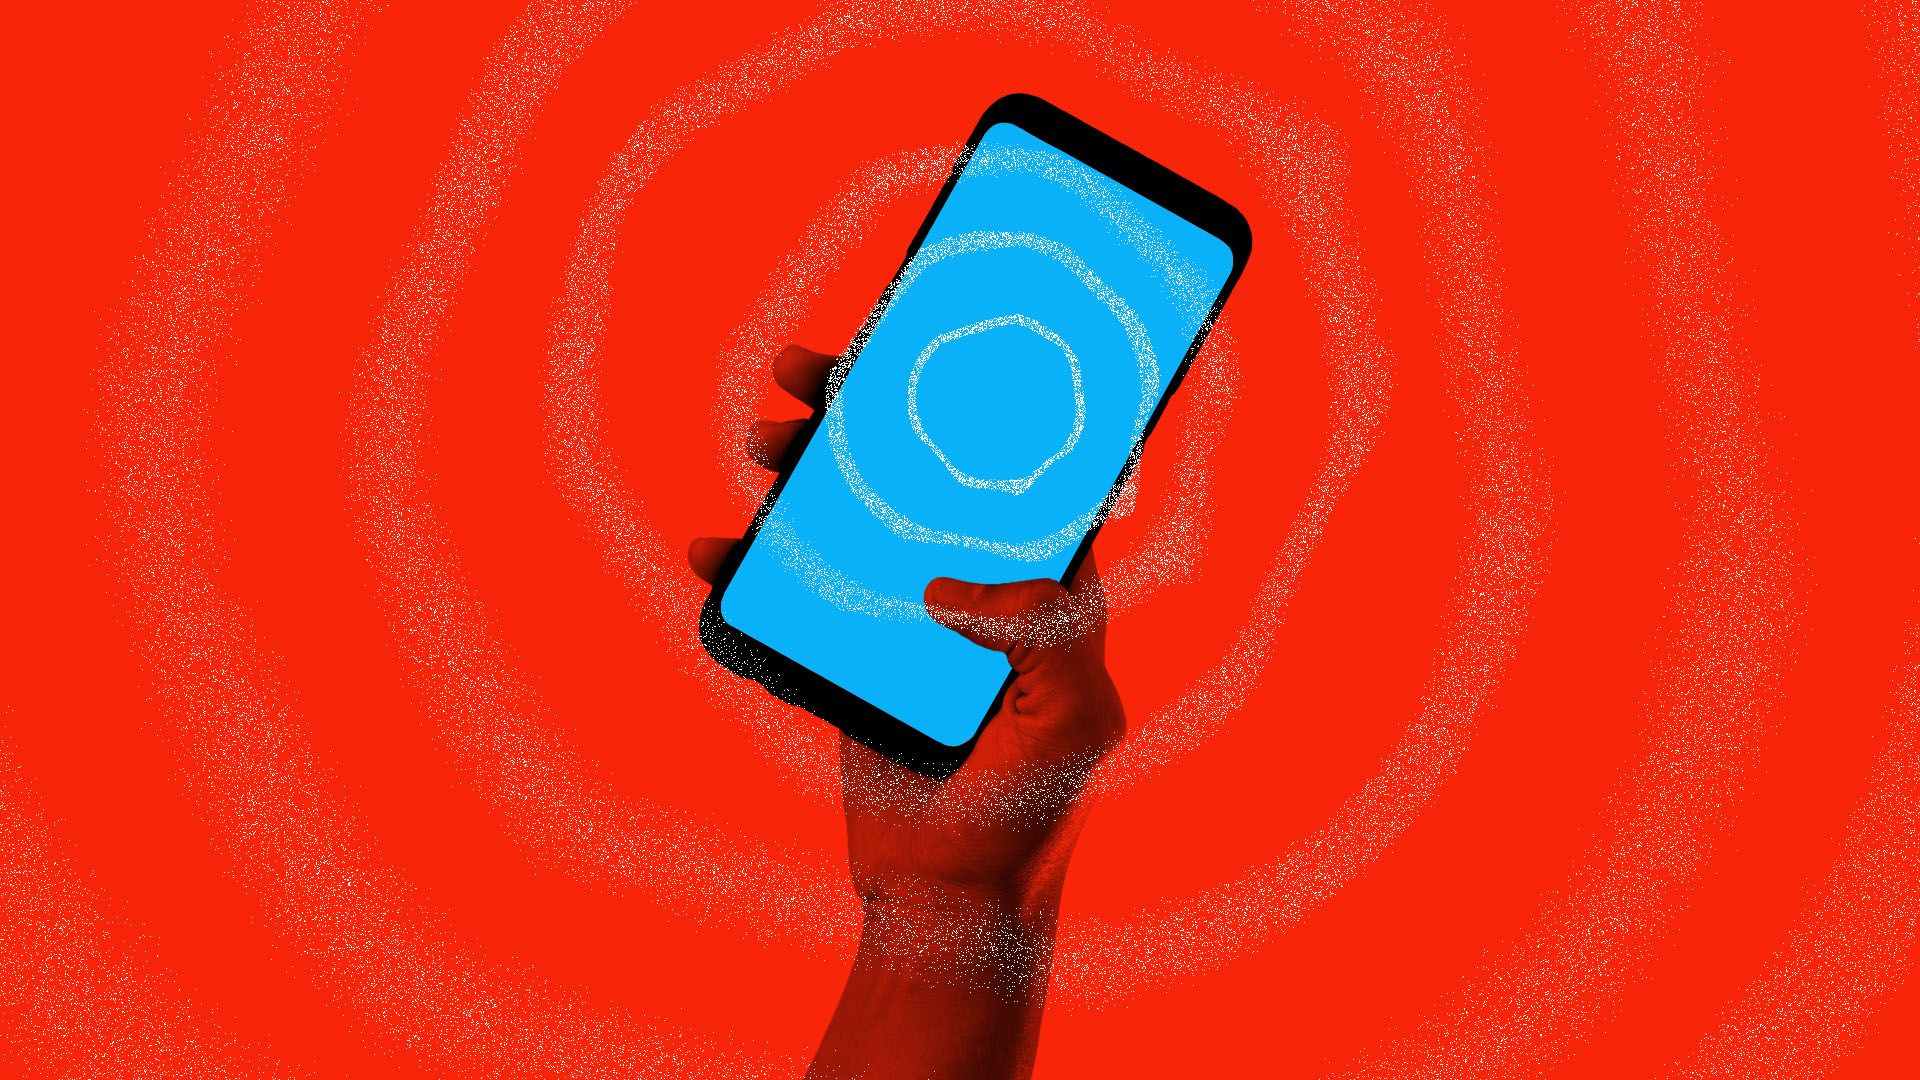 Illustration of a cellphone emanating an earthquake warning